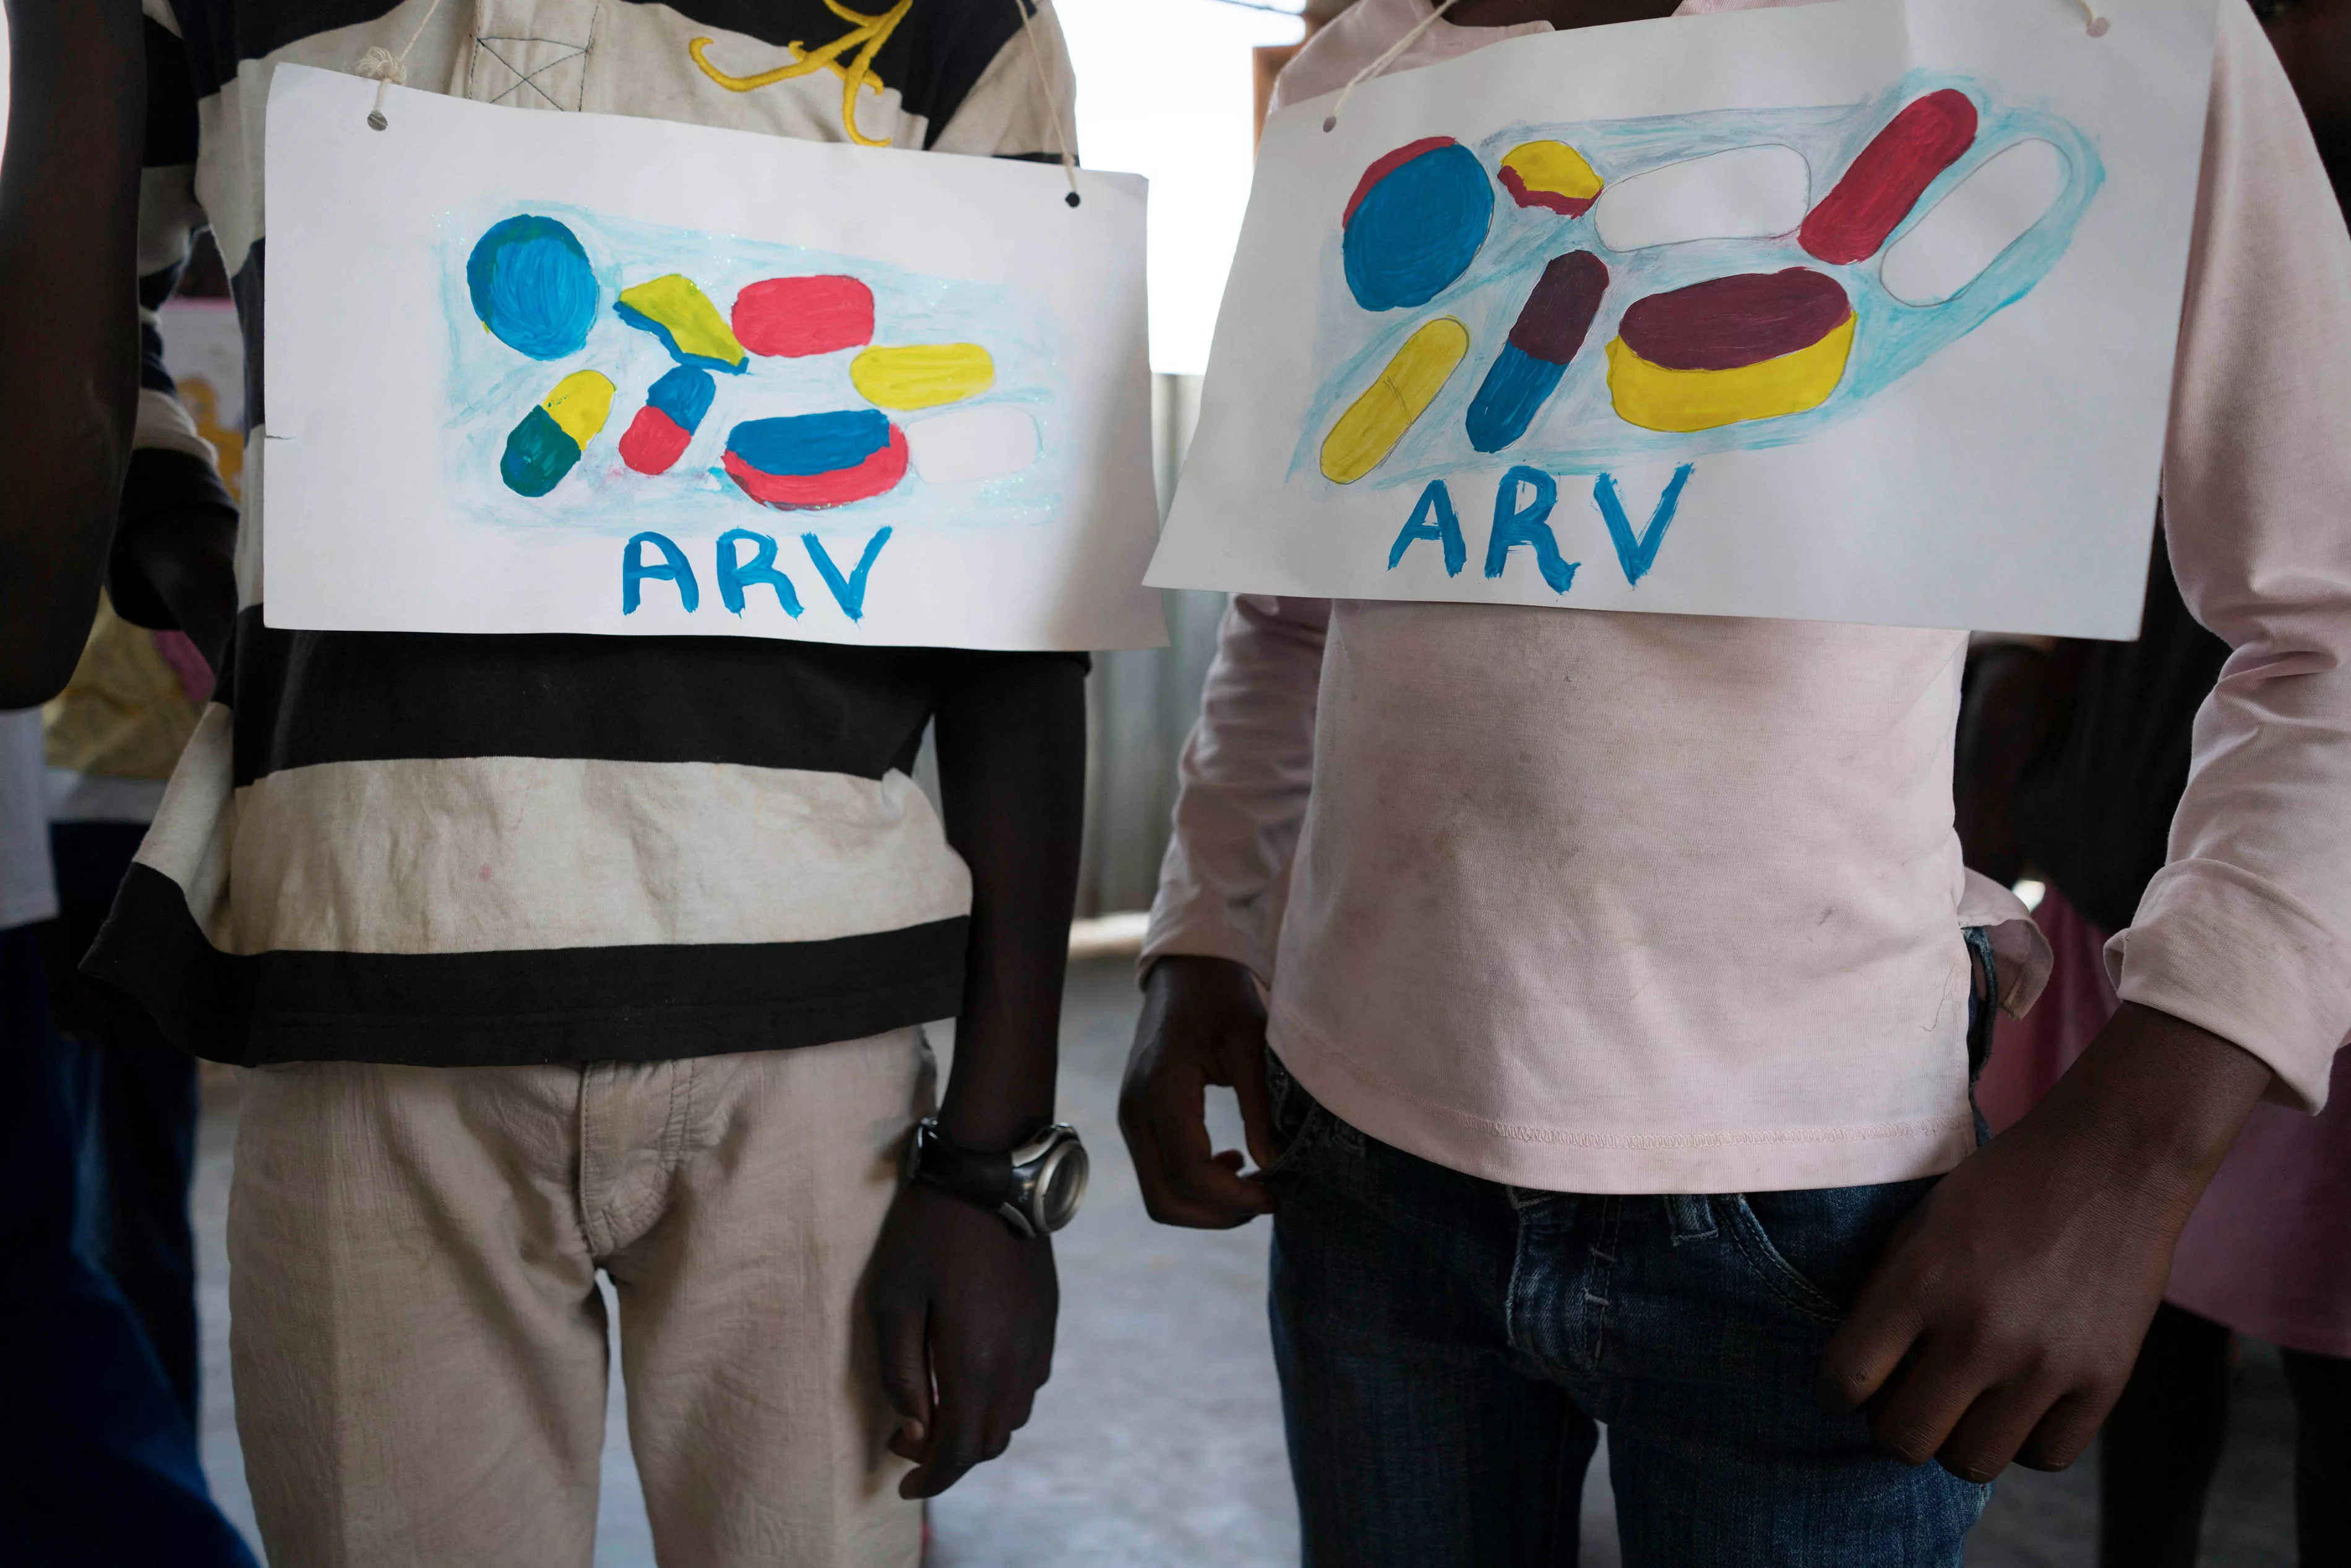 An HIV support group for children at Epworth Clinic on Harare’s outskirts. MSF has set up community support groups for HIV patients from the Clinic. At Epworth, children and young people come together to give each other support. Through games and education they learn about HIV and how they can live a healthy life.